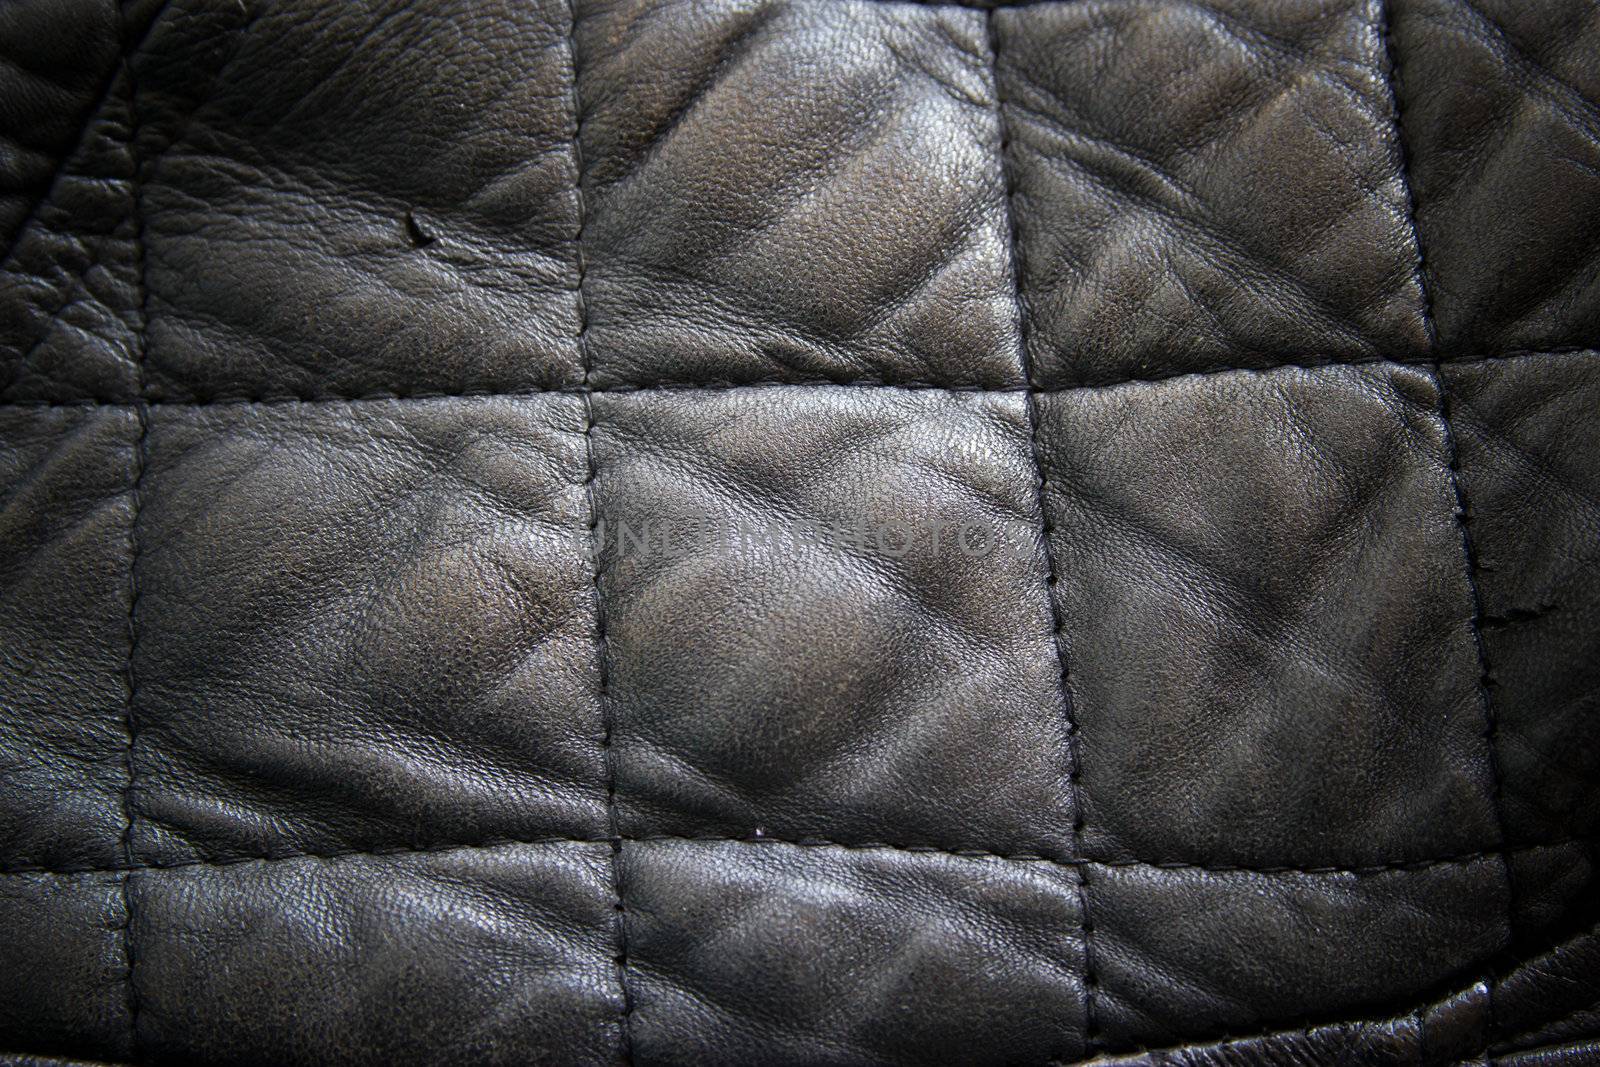 leather texture colose-up with linear stiches. Part of a leather jacket.